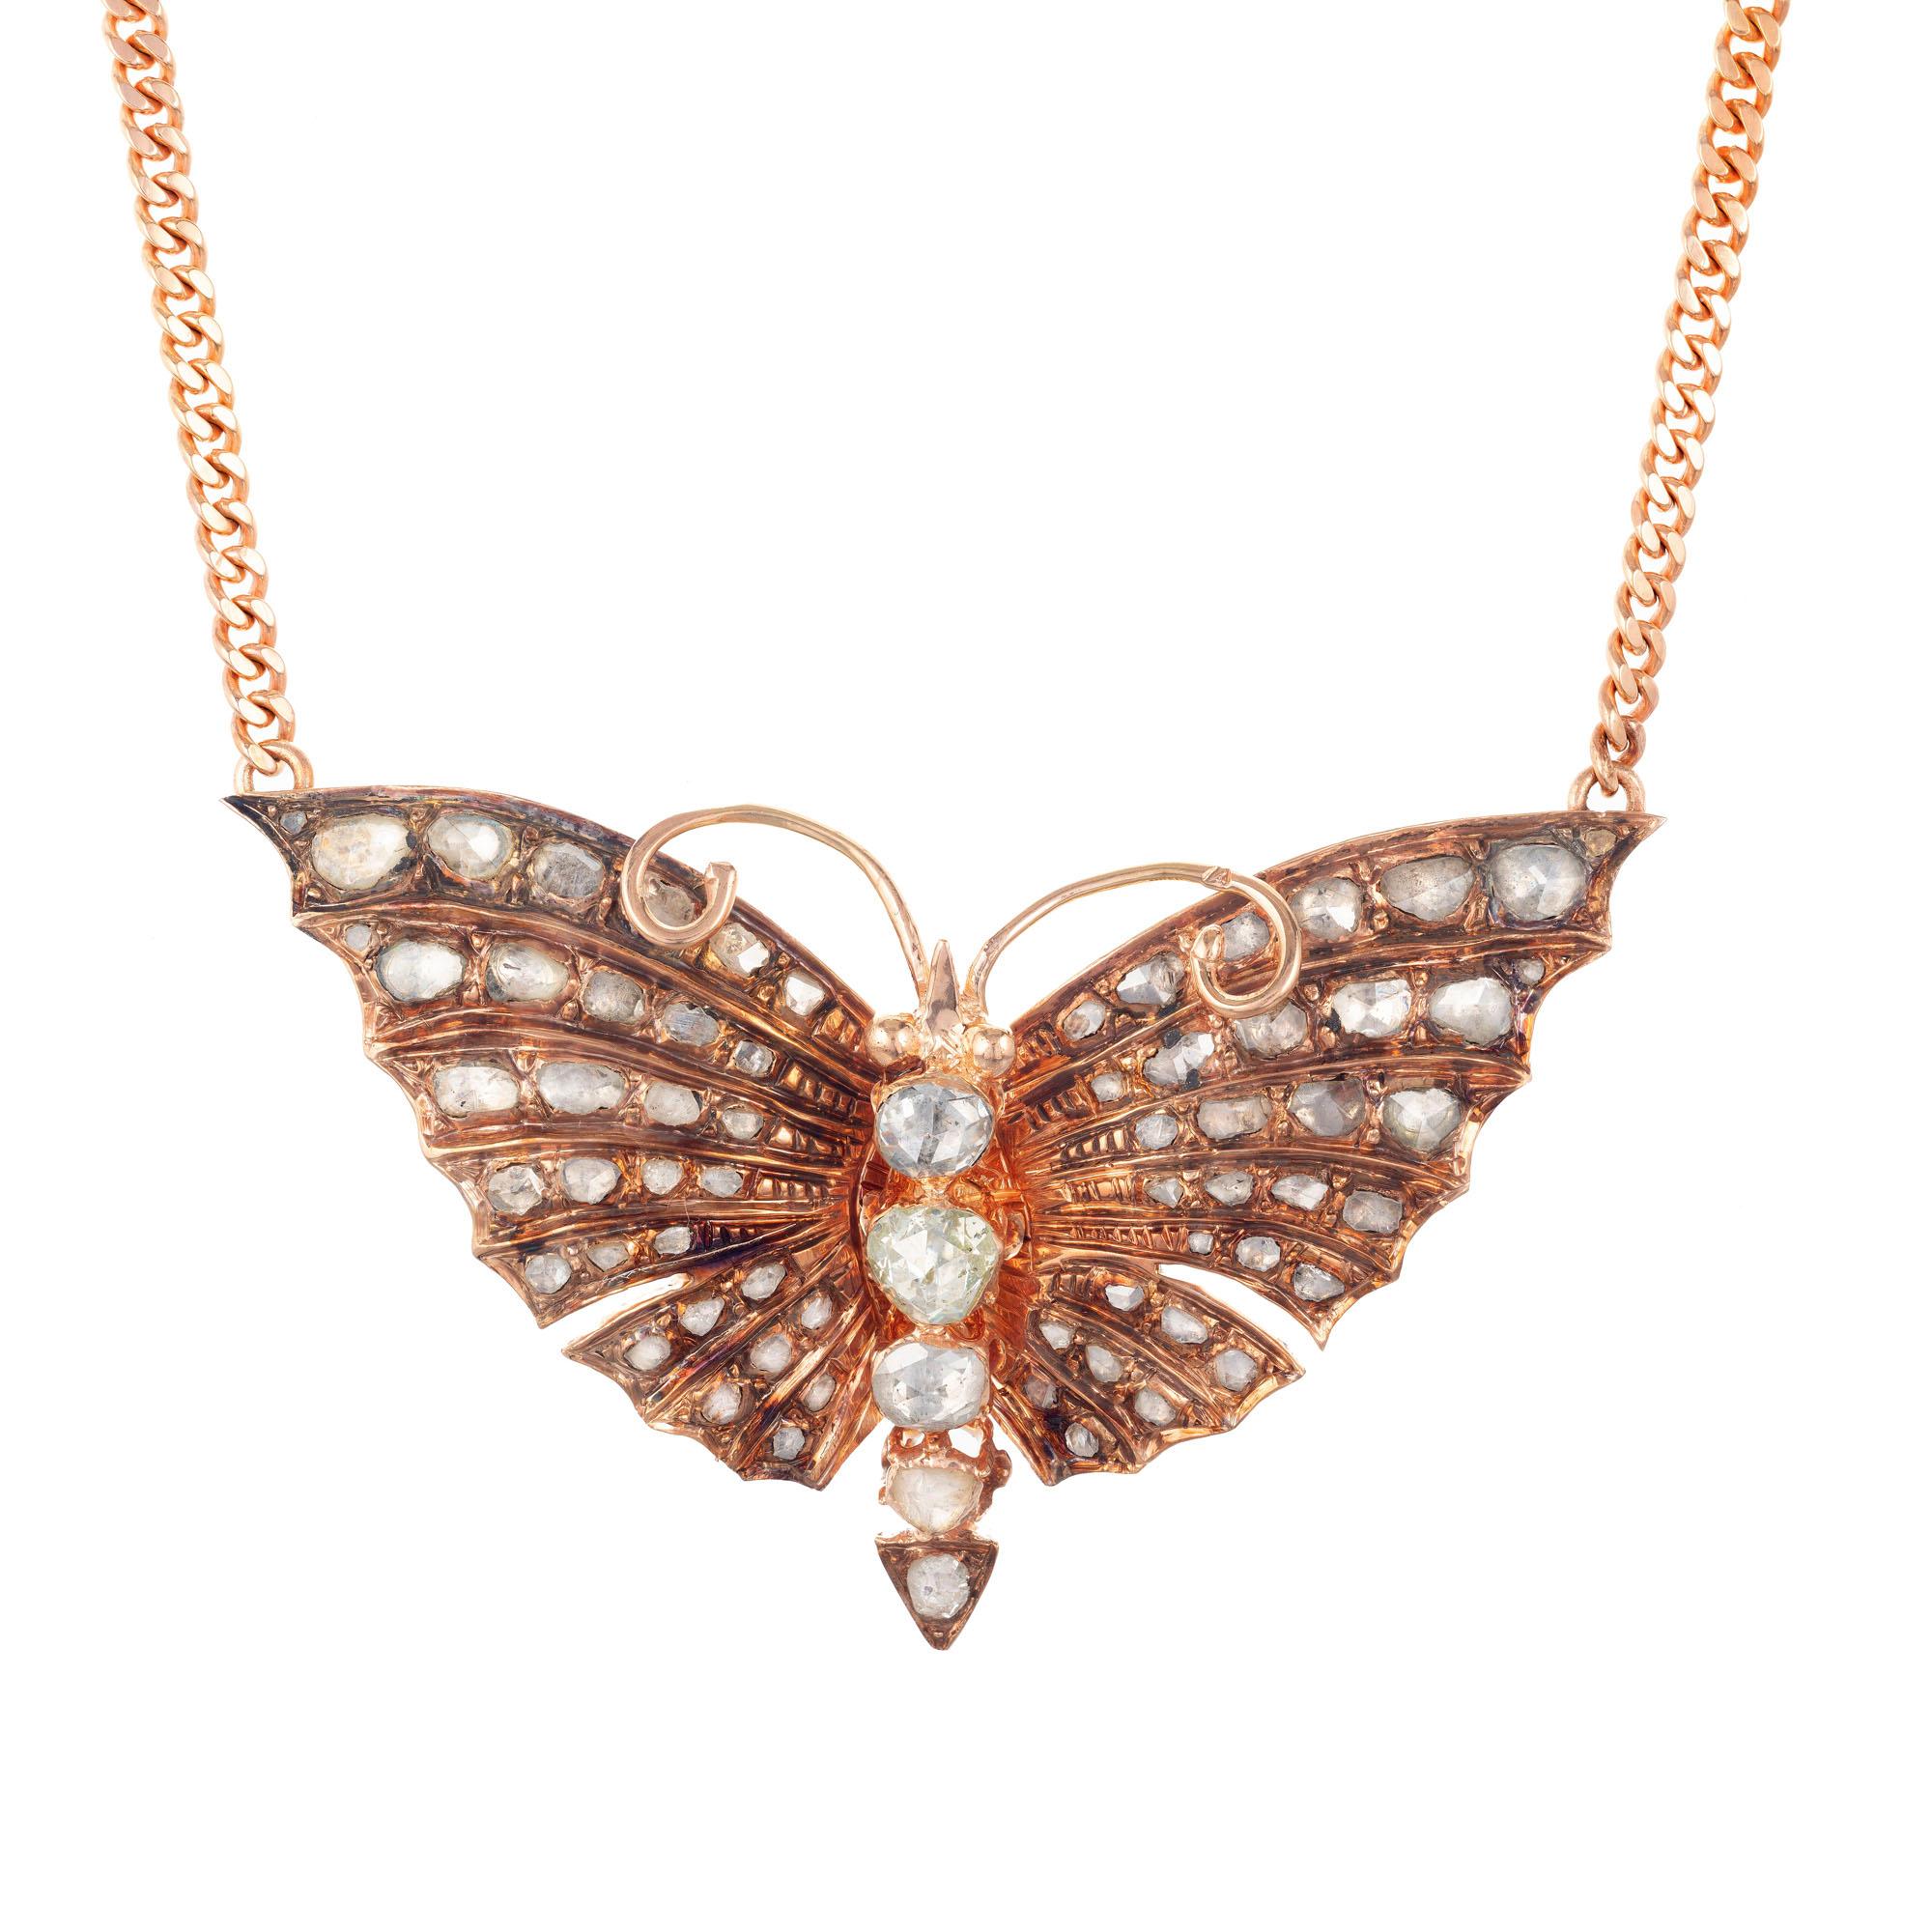 Estate early Victorian 1850s butterfly diamond pendant necklace. 14k rose gold with rose cut diamonds on a rose gold chain. Natural patina. Chain is later, approximately 1900.

69 old rose cut I-L SI-I diamonds, Approximate 3.30cts 
14k rose gold